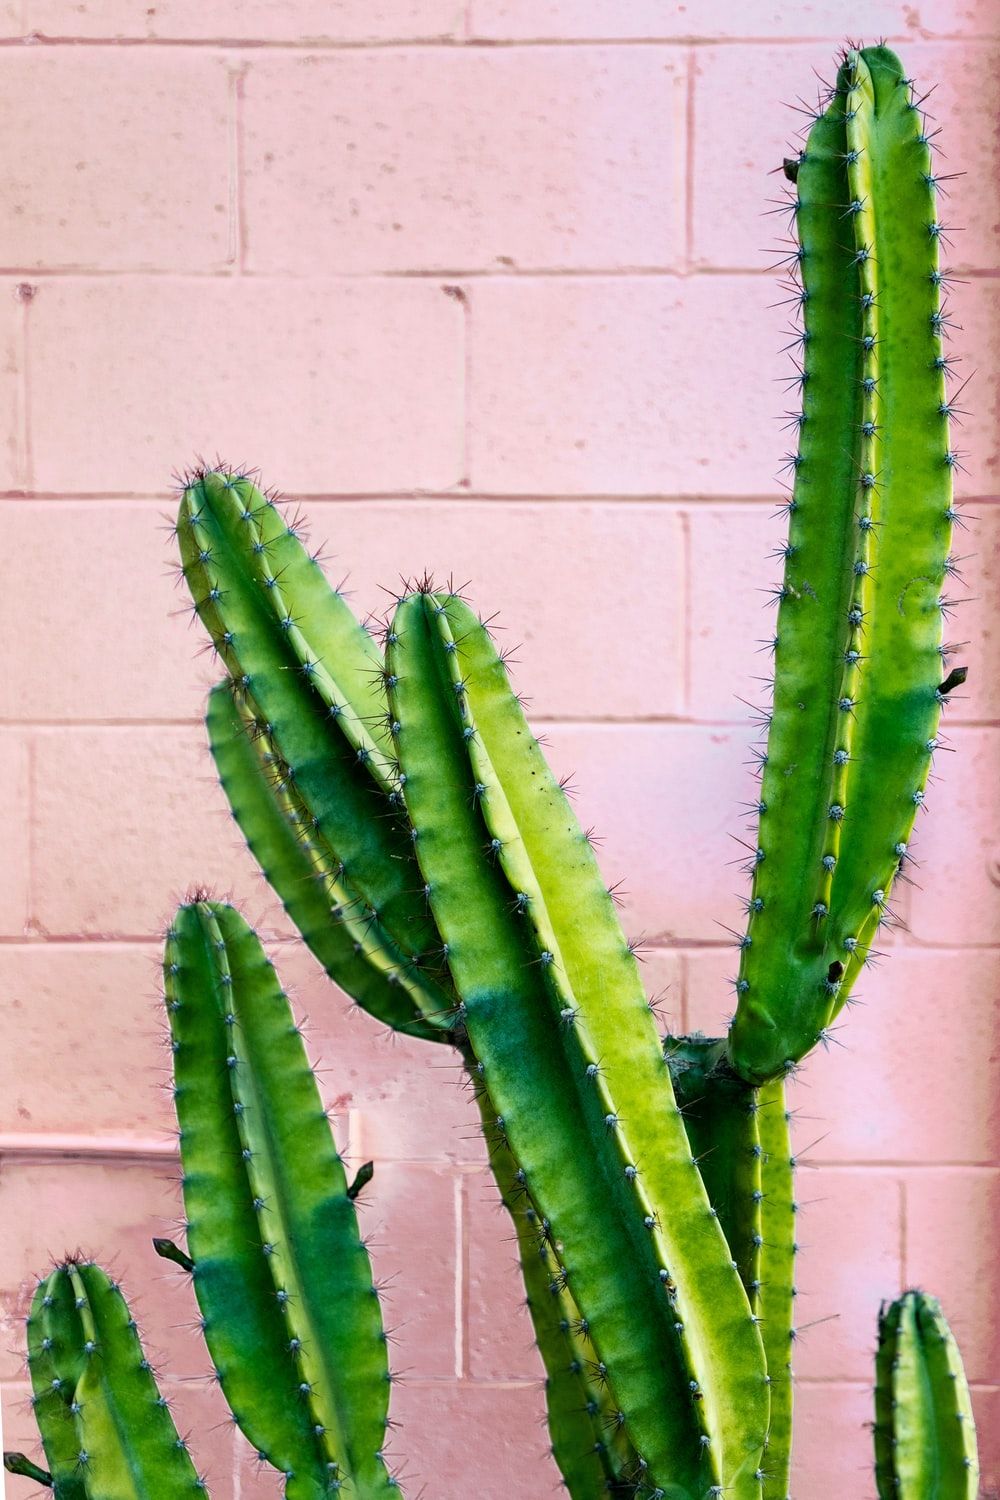 Iphone Cactus Wallpapers